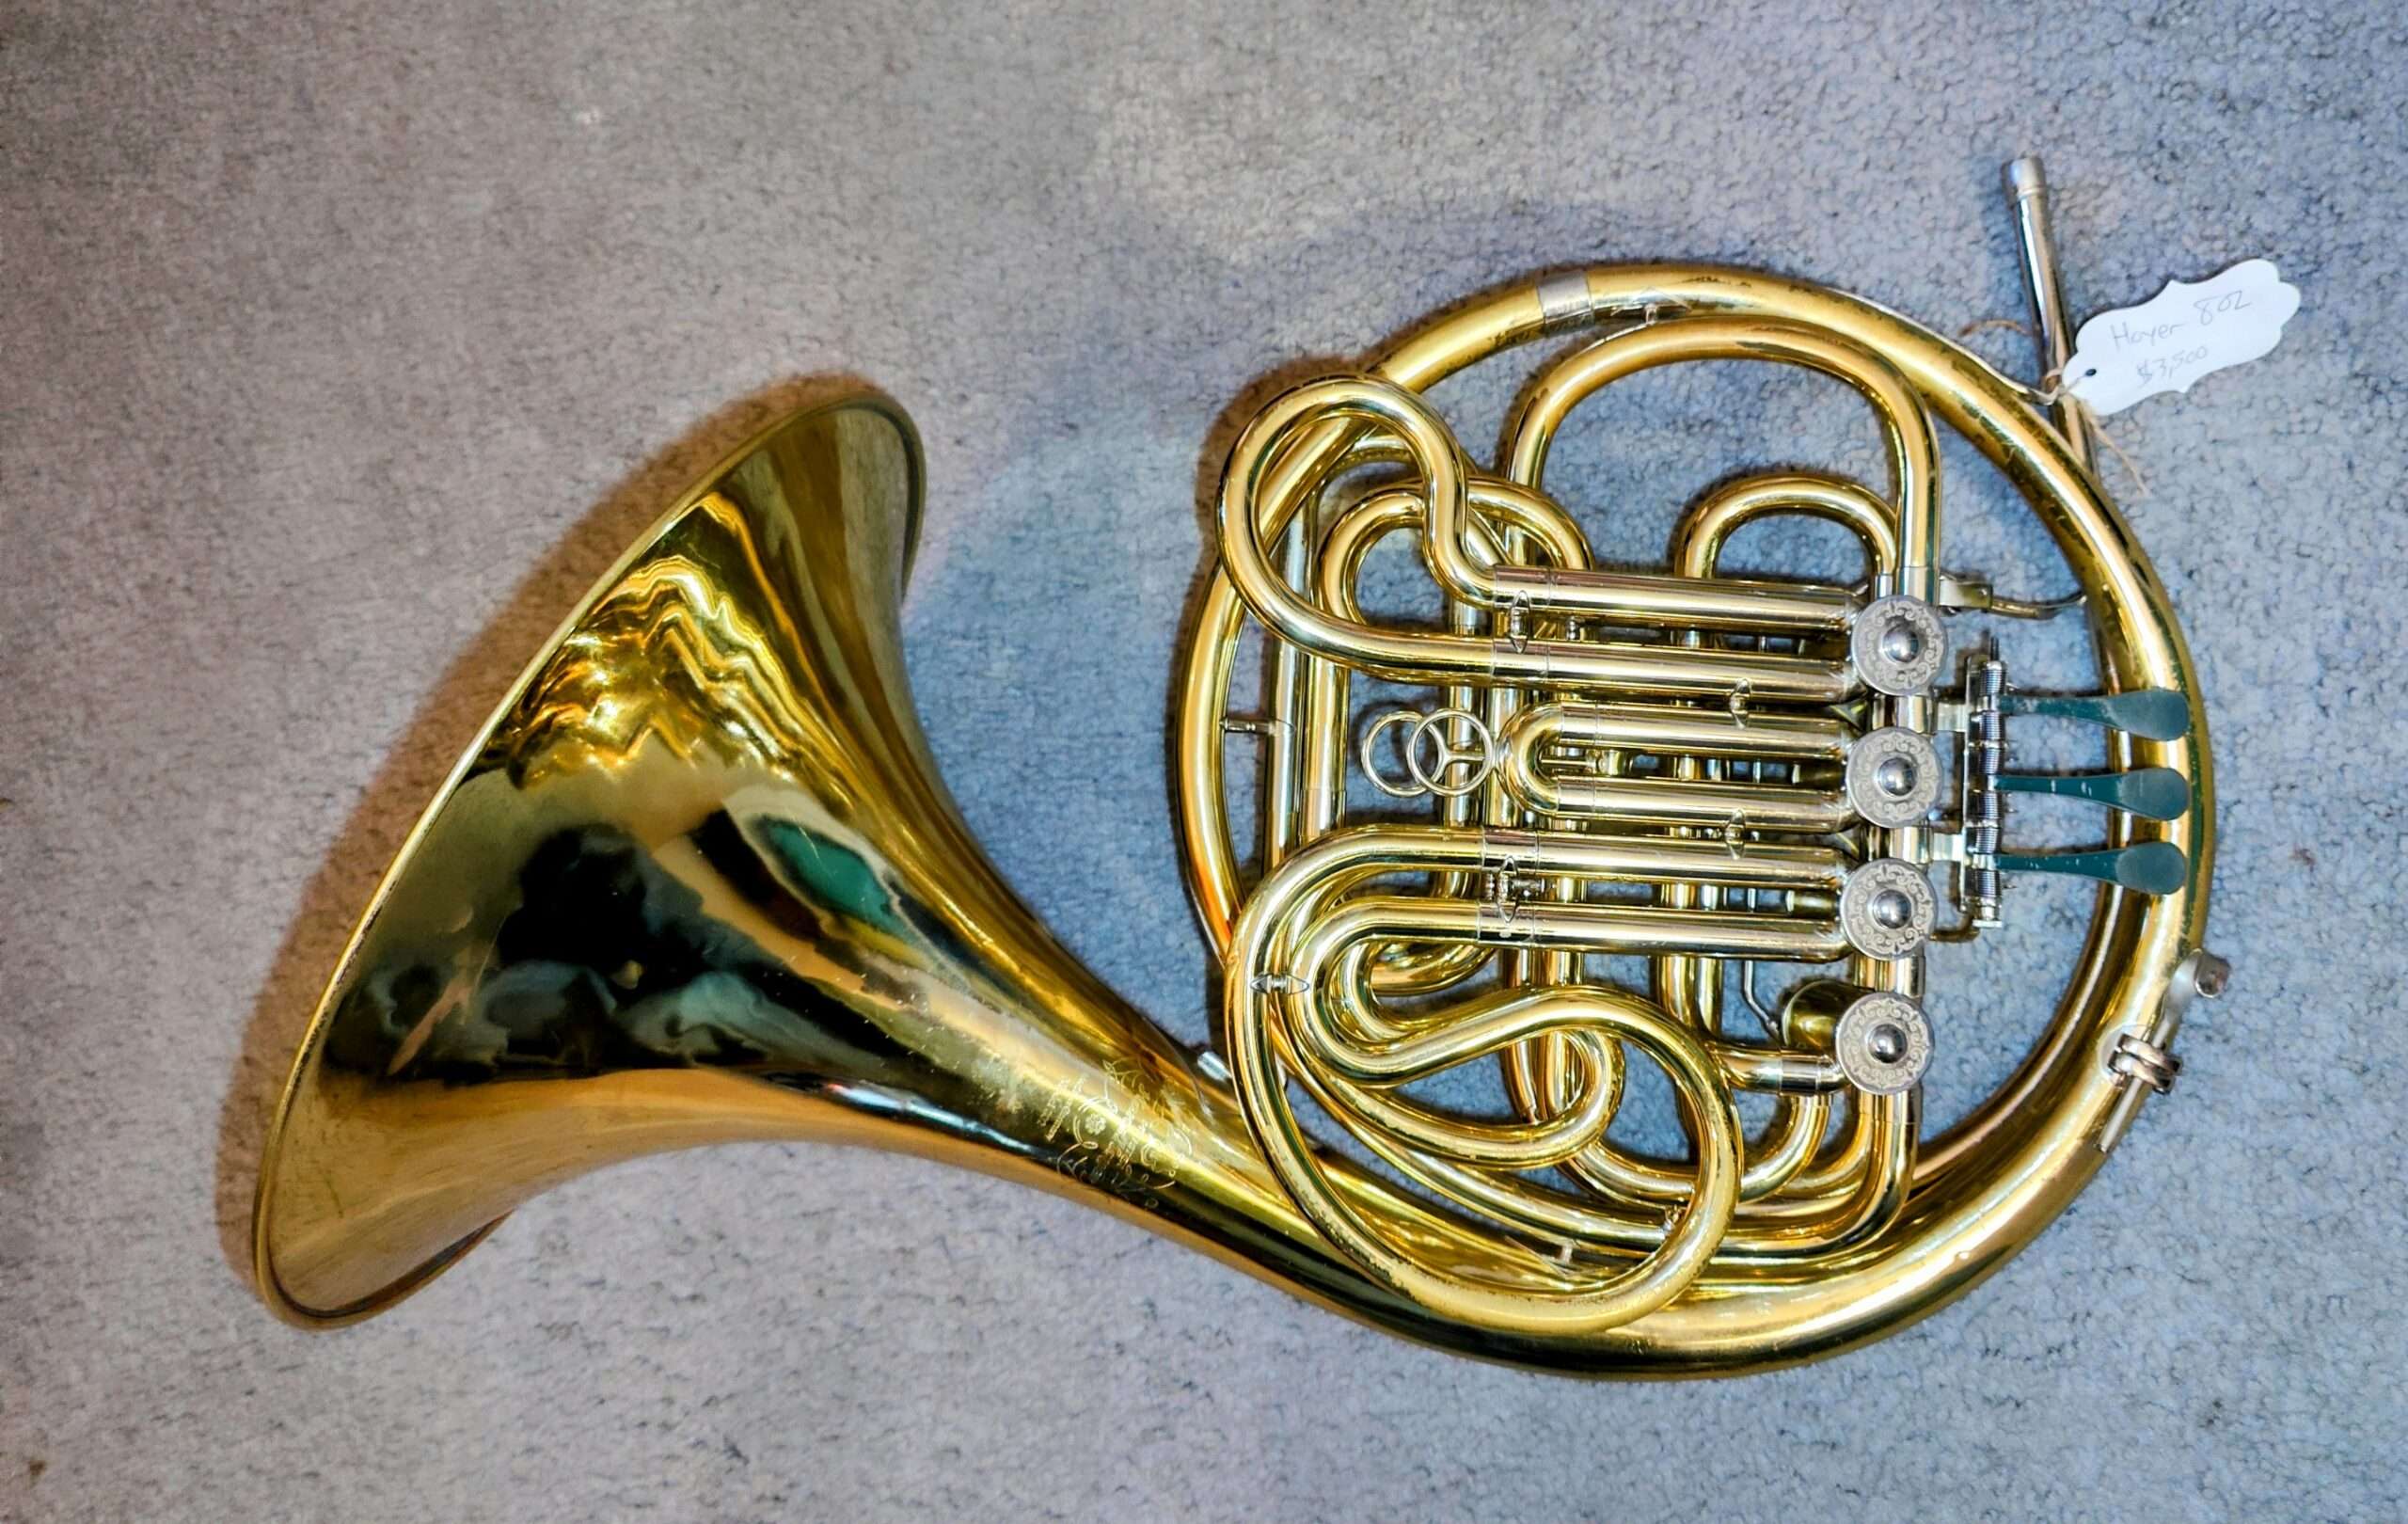 Hans Hoyer 801A-L Double Horn right handed - Vogt instruments